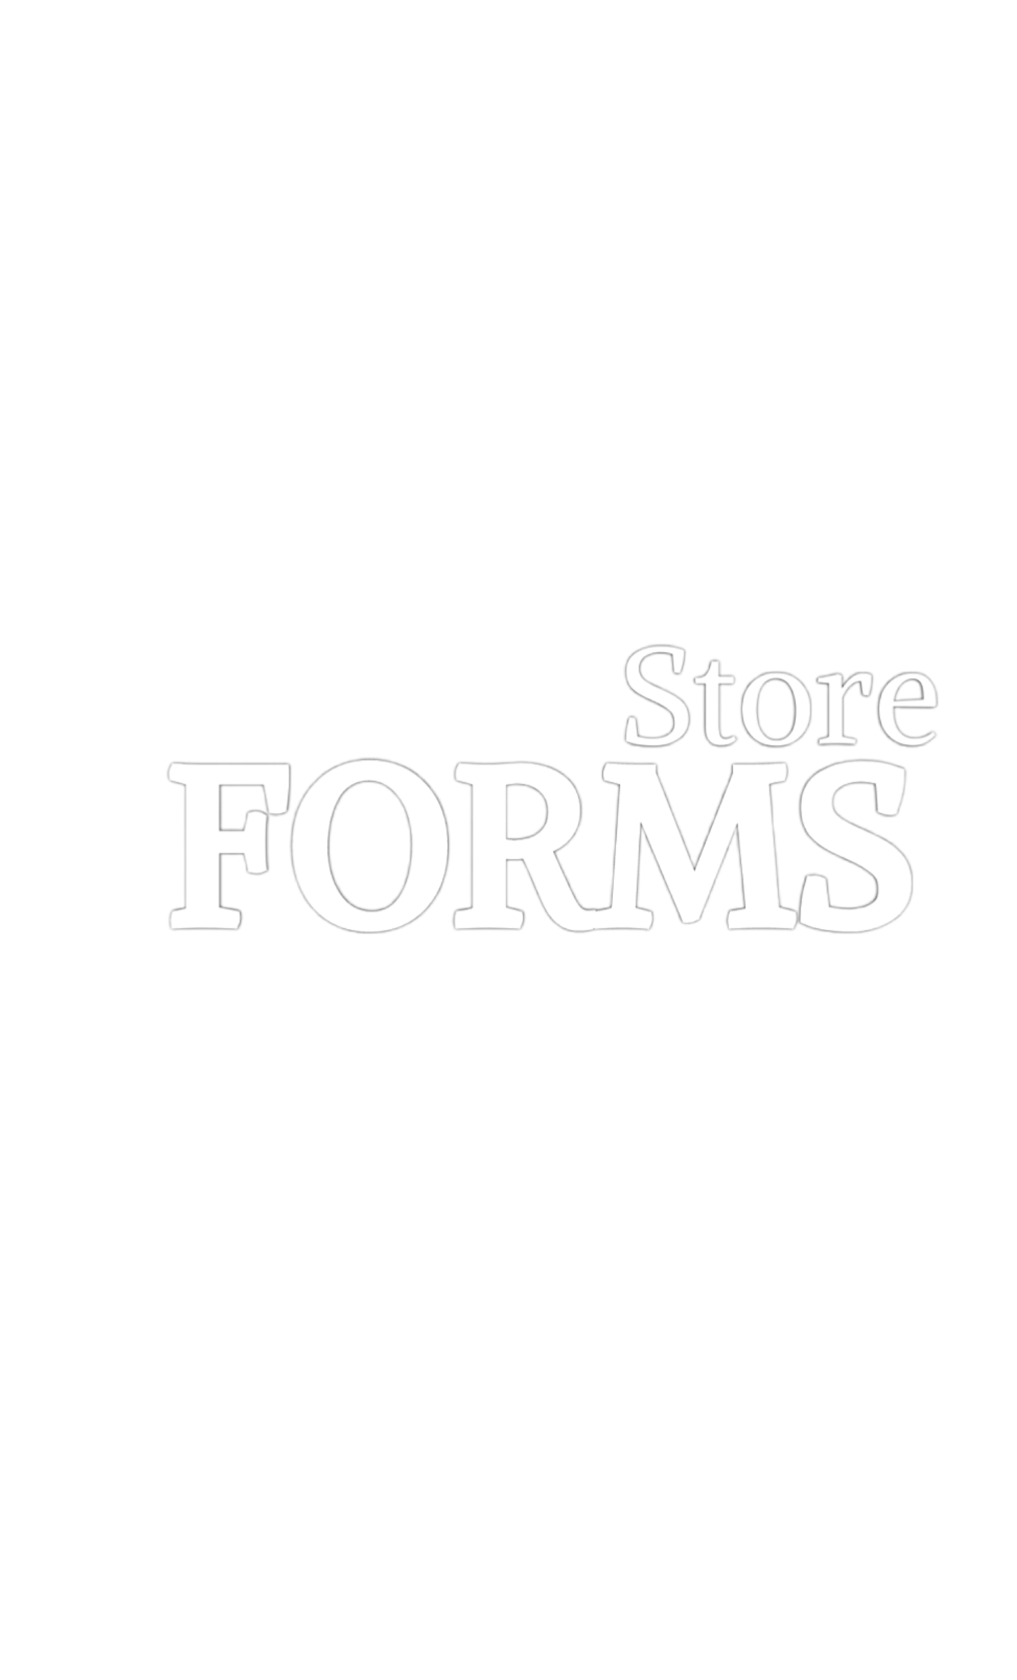 FORMS・store